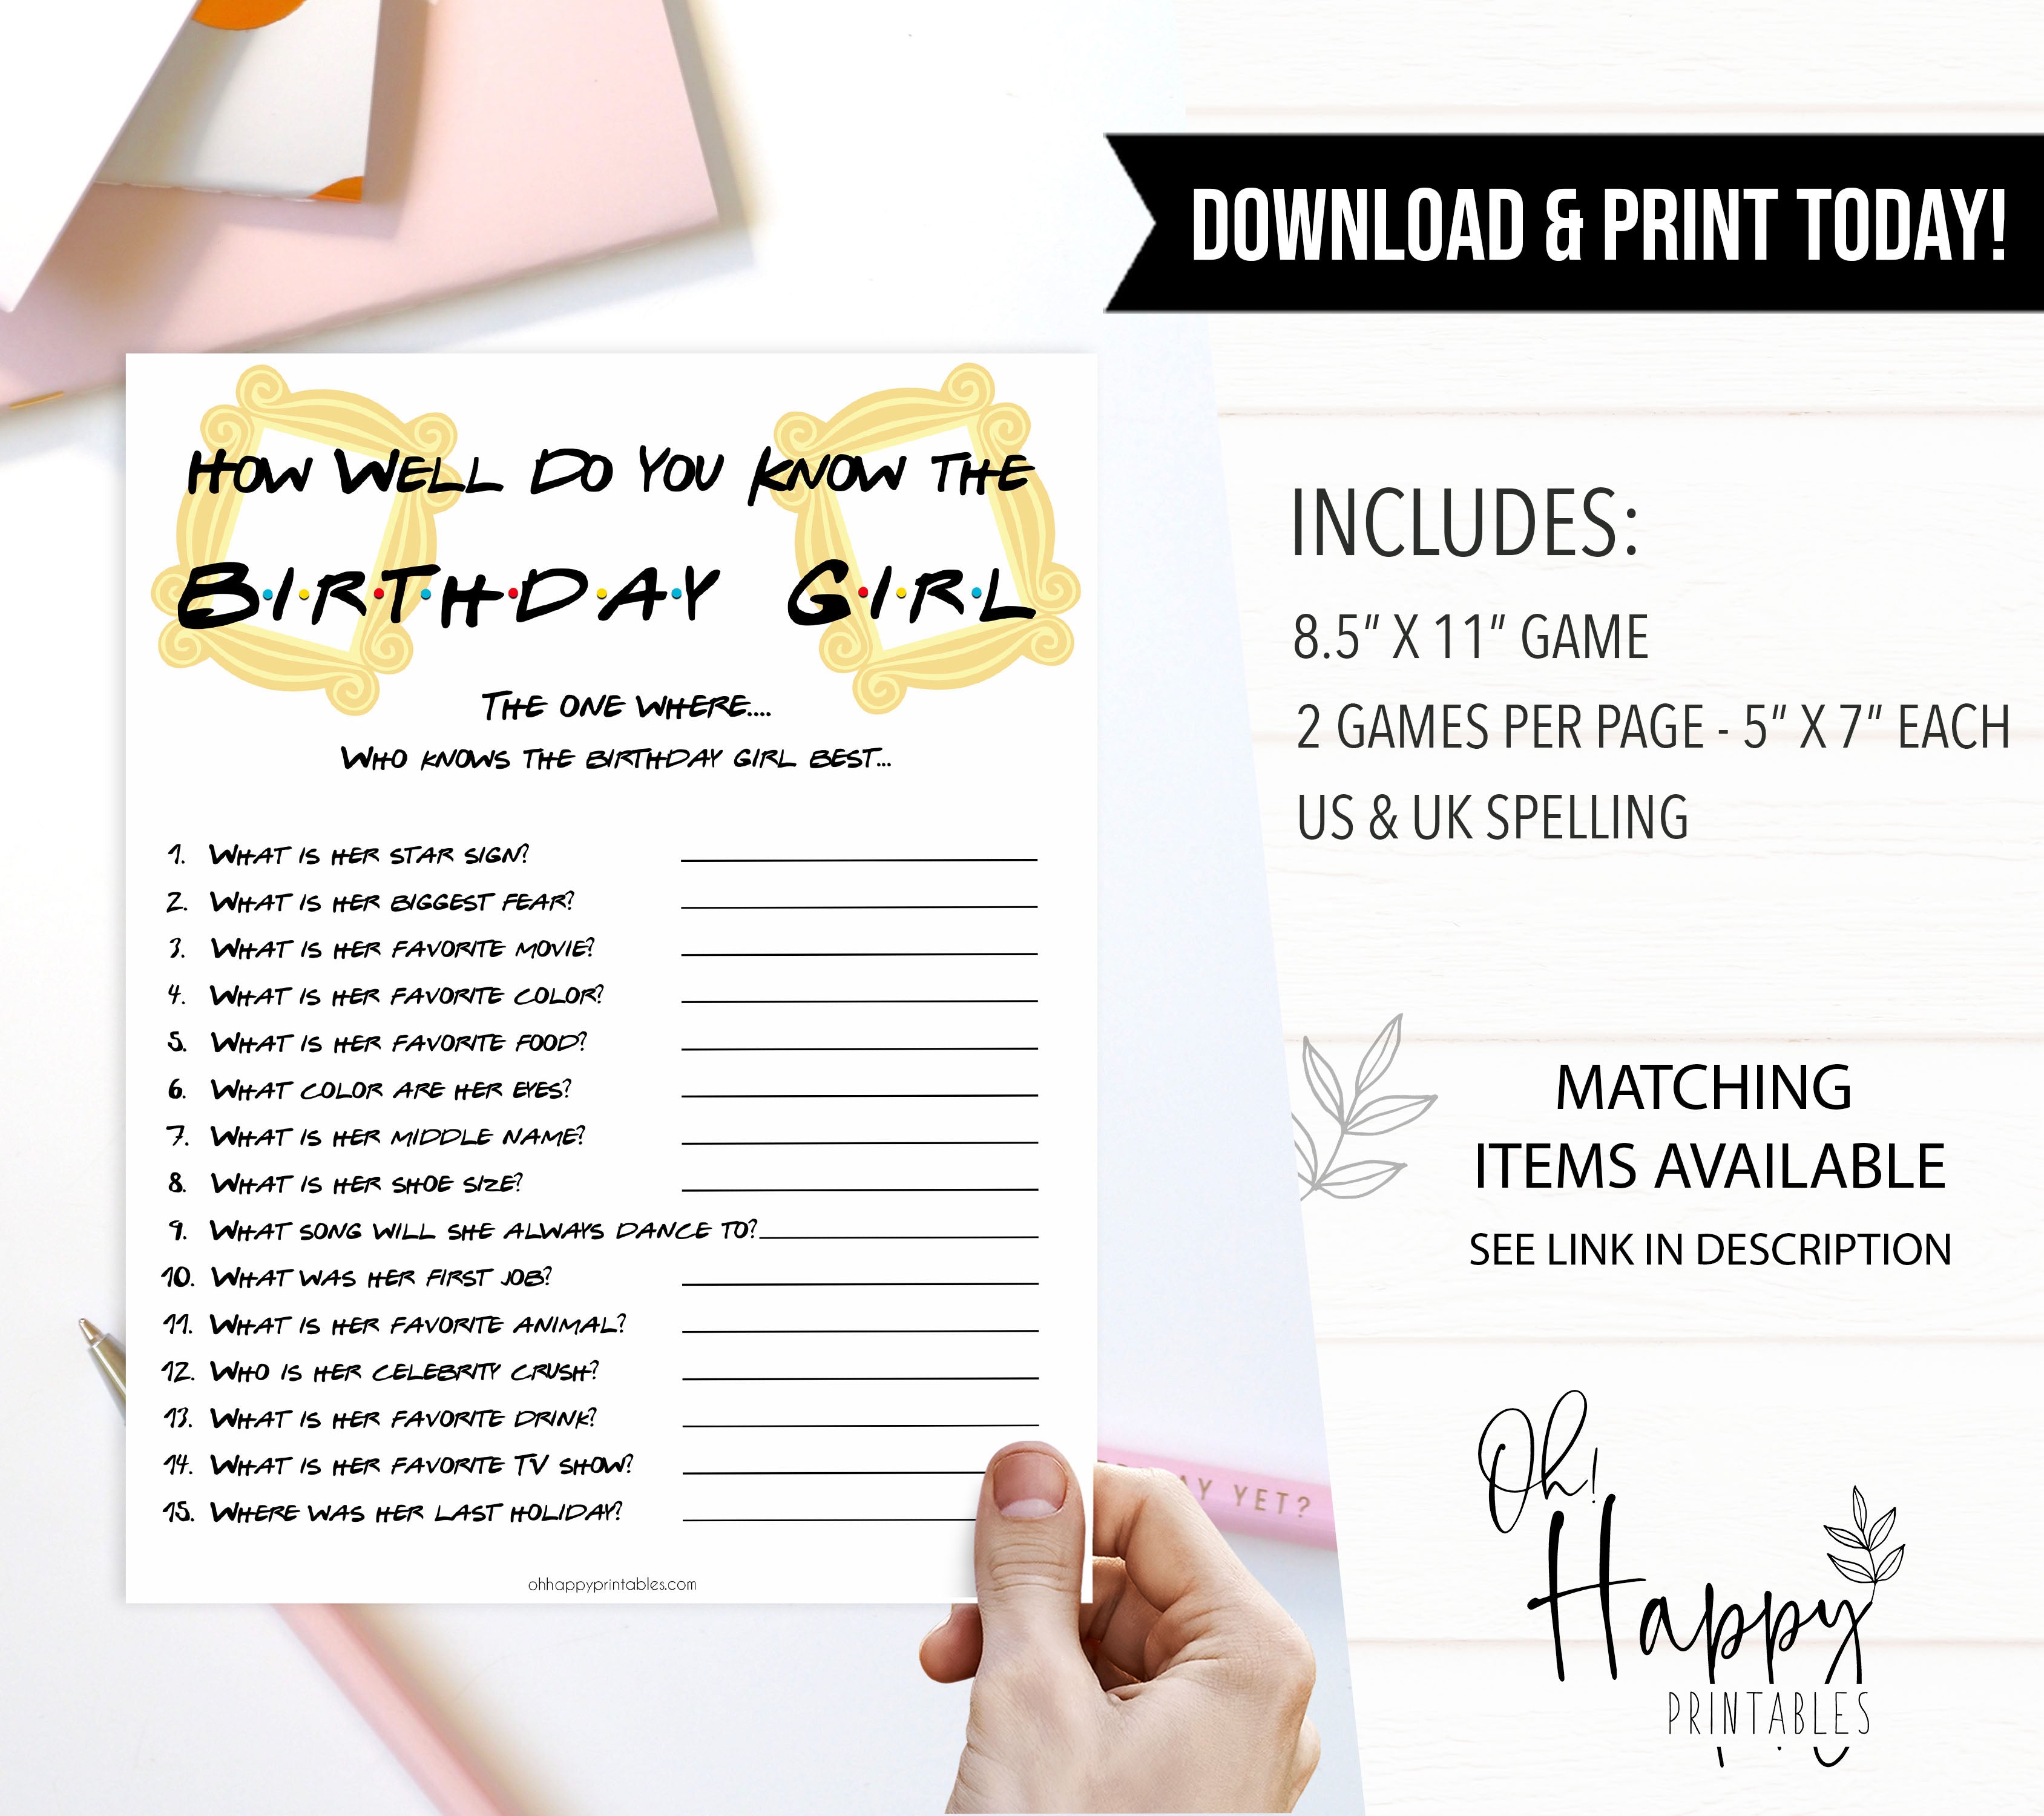 friends birthday games, how well do you know the birthday girl, printable birthday games, friends birthday, fun birthday games